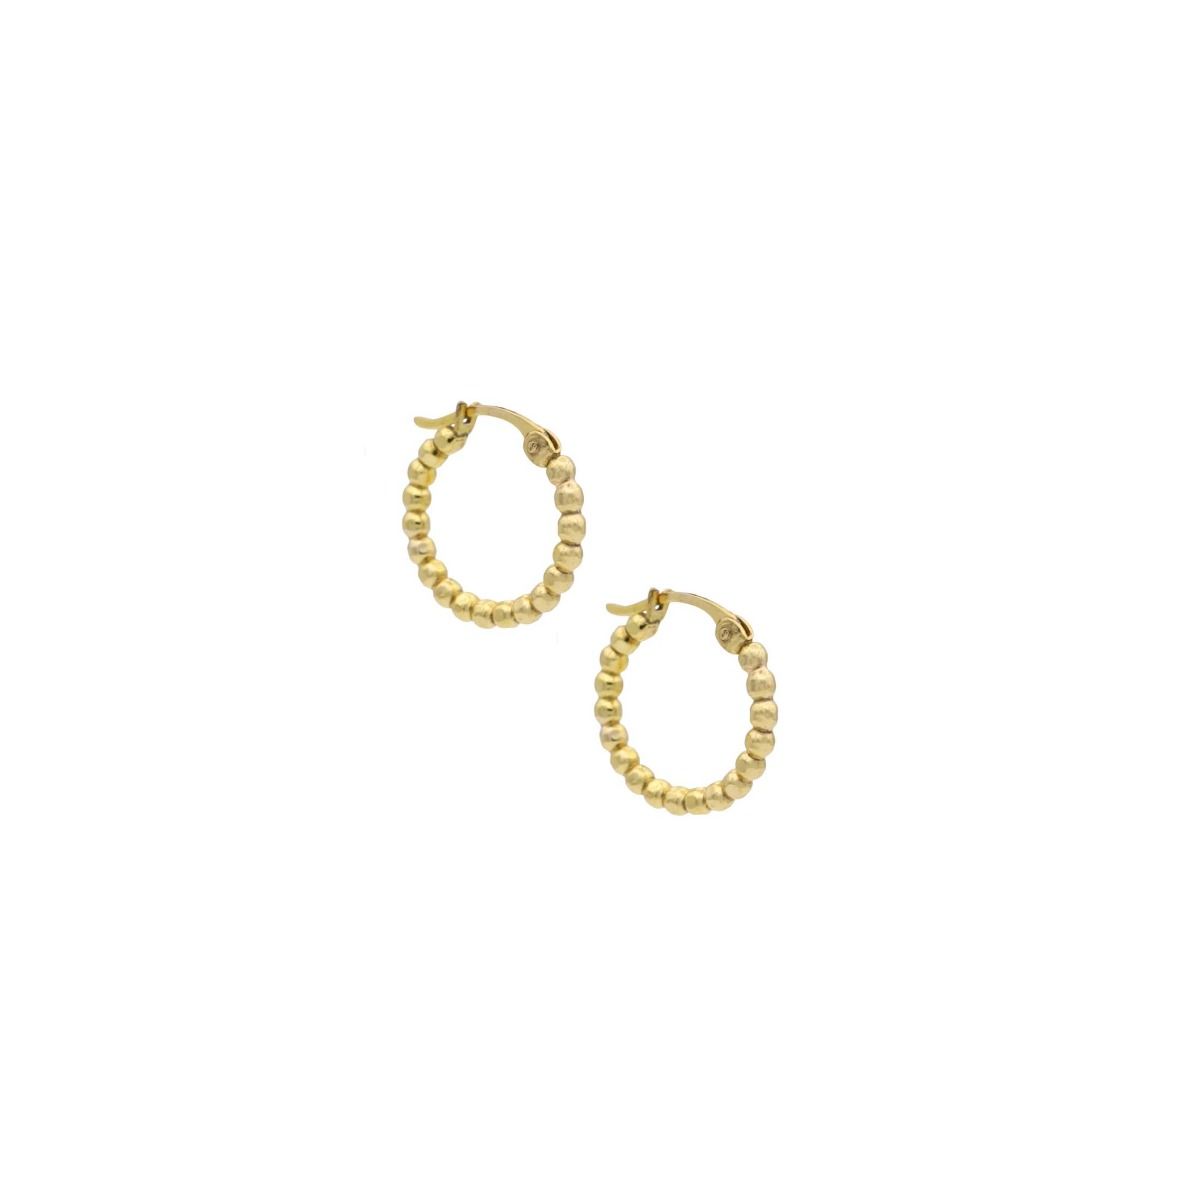 Amazon.com: 14k Gold Small Double Hoop Earrings for Single Piercing | Twist  Spiral Cartilage Earring | Double Piercing Earrings for Women : Handmade  Products